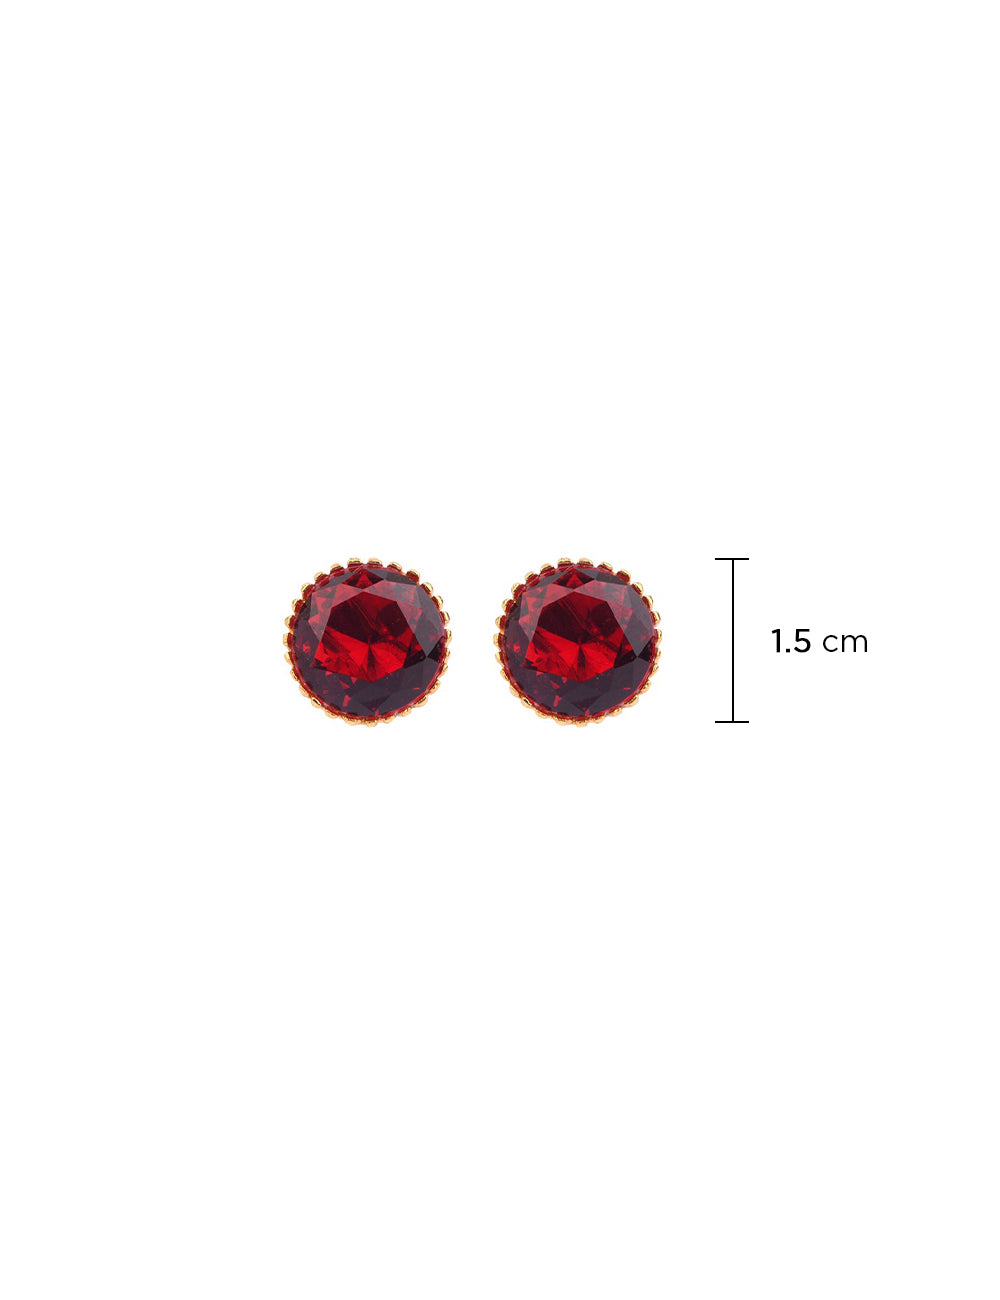 Ruby Studs (Semi-Precious Ruby) | Handmade | 24K Gold Plated | Made in India